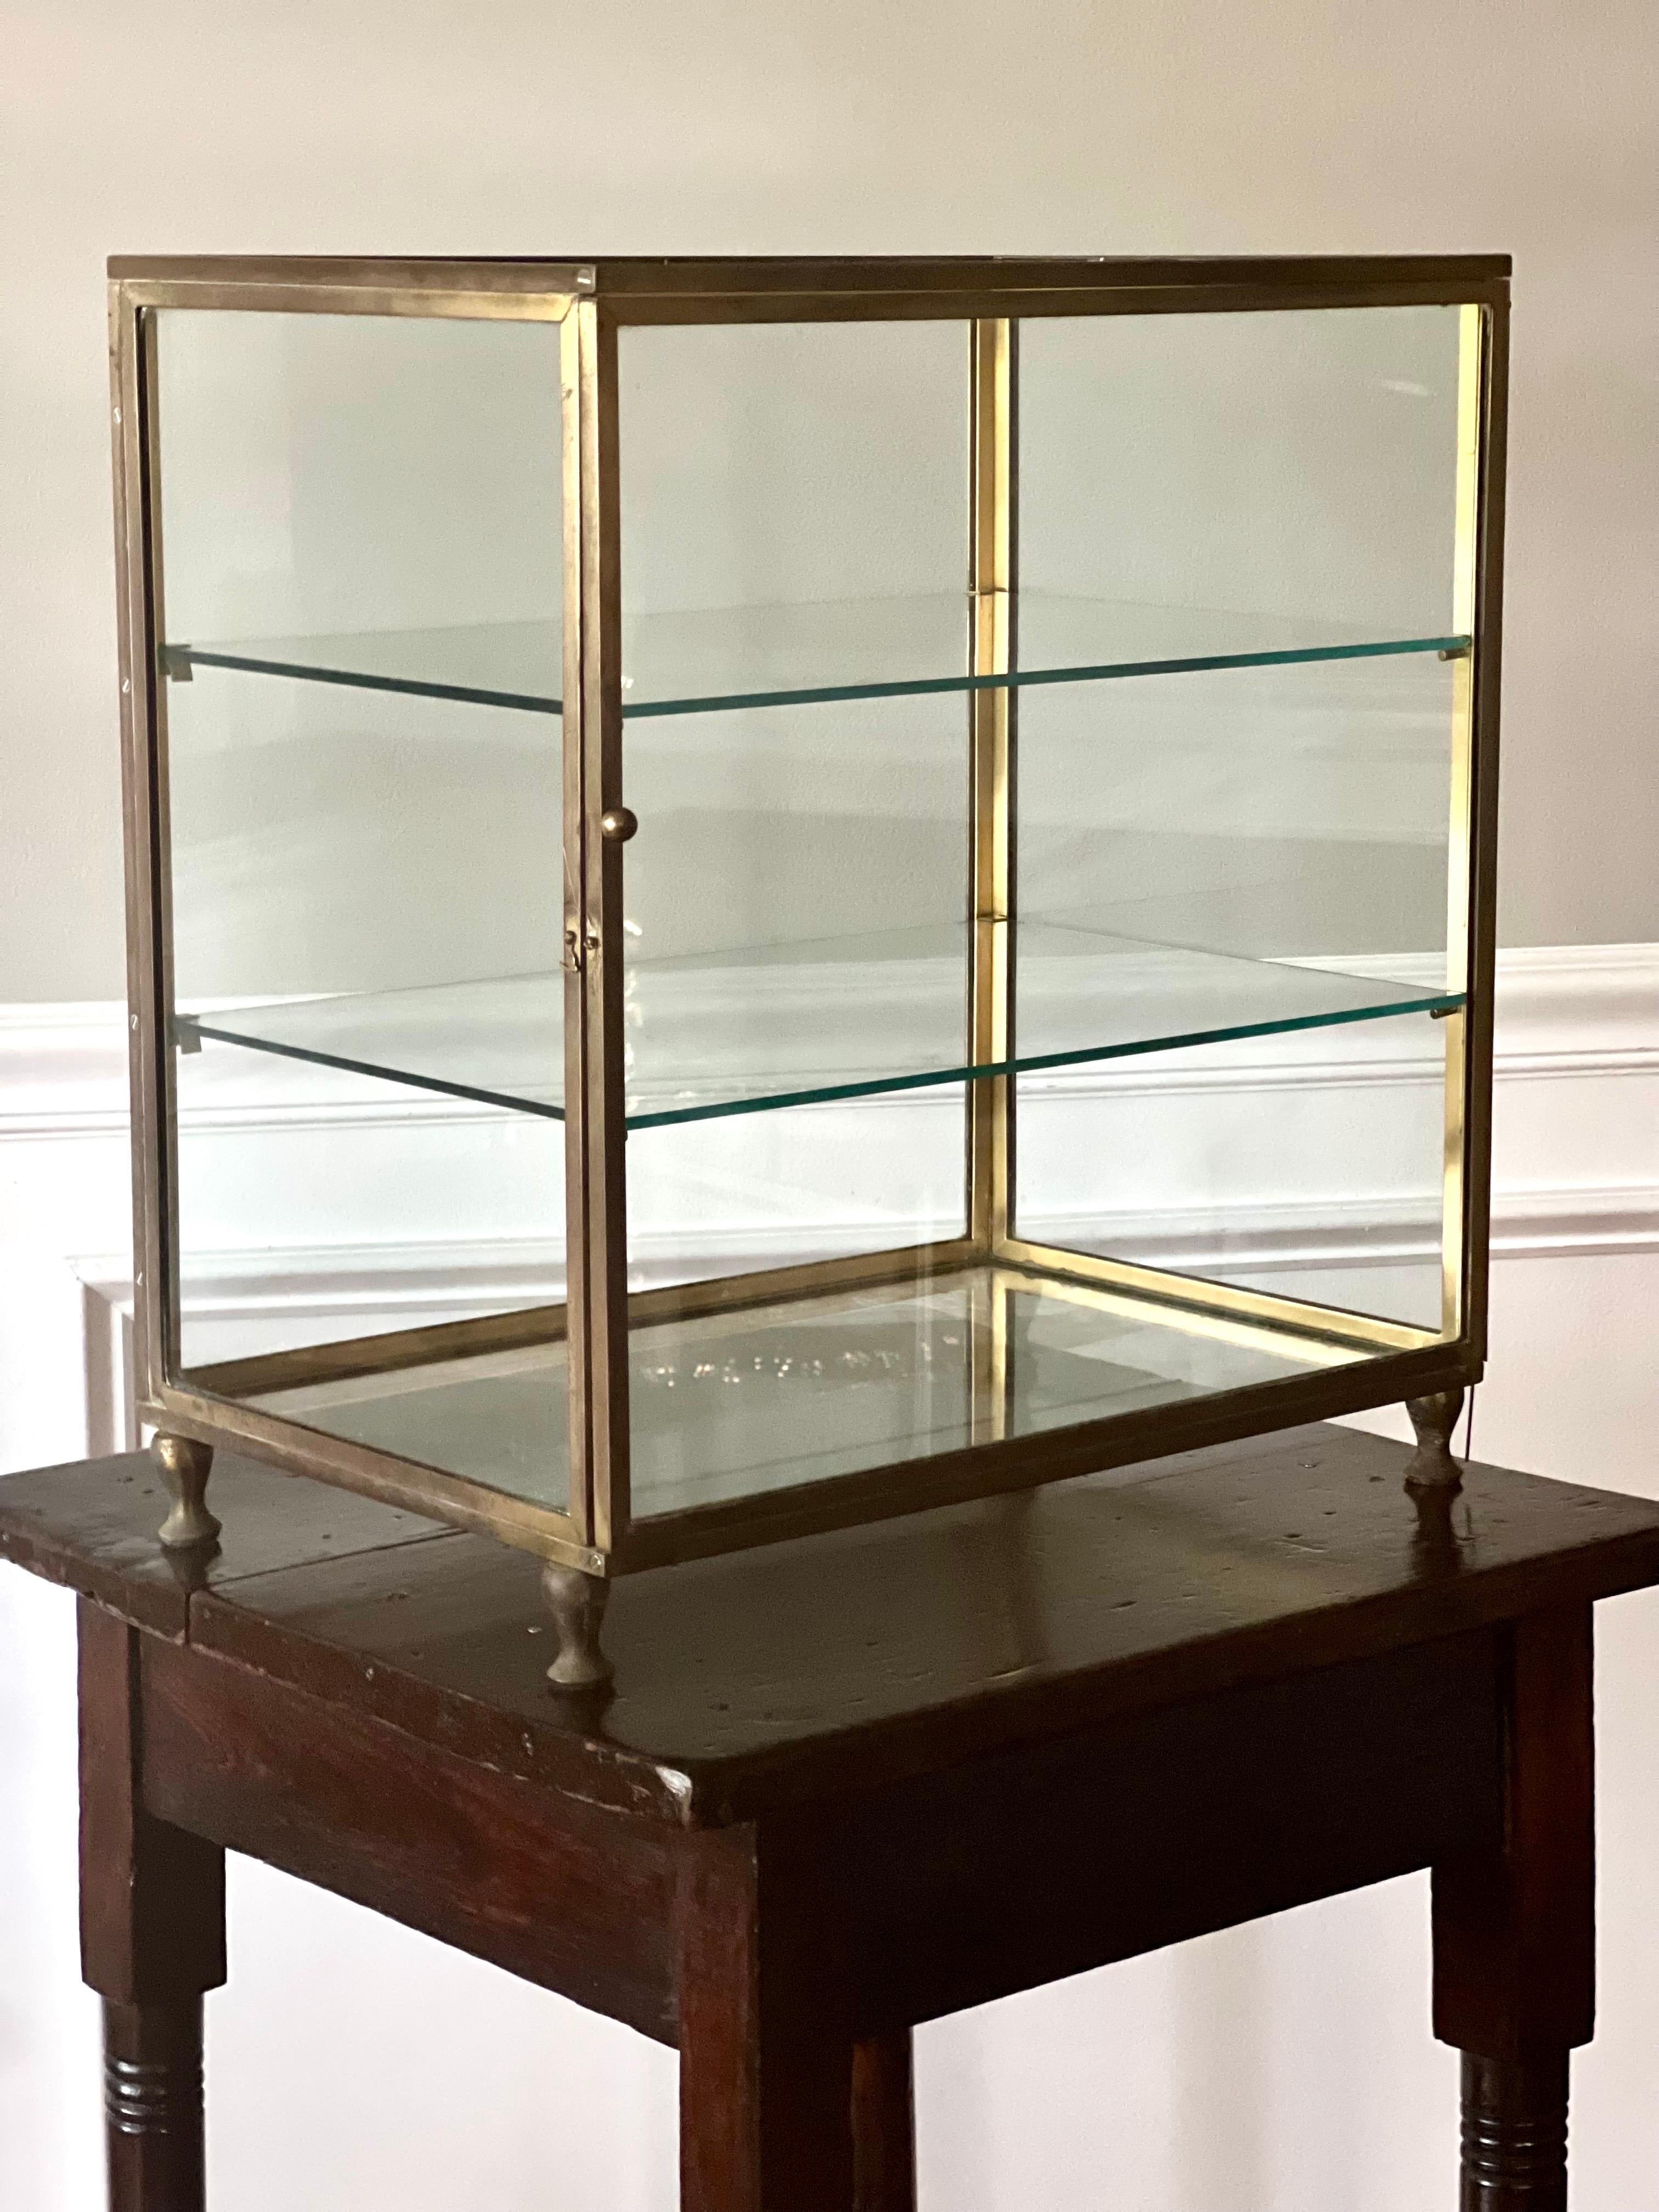 Rare English Early Modernist polished bronze shop display cabinet or tabletop vitrine, circa 1890.

Originally used as a display case in a boutique, this exquisite vitrine features six sides of glass with two glass shelves and a sturdy, polished